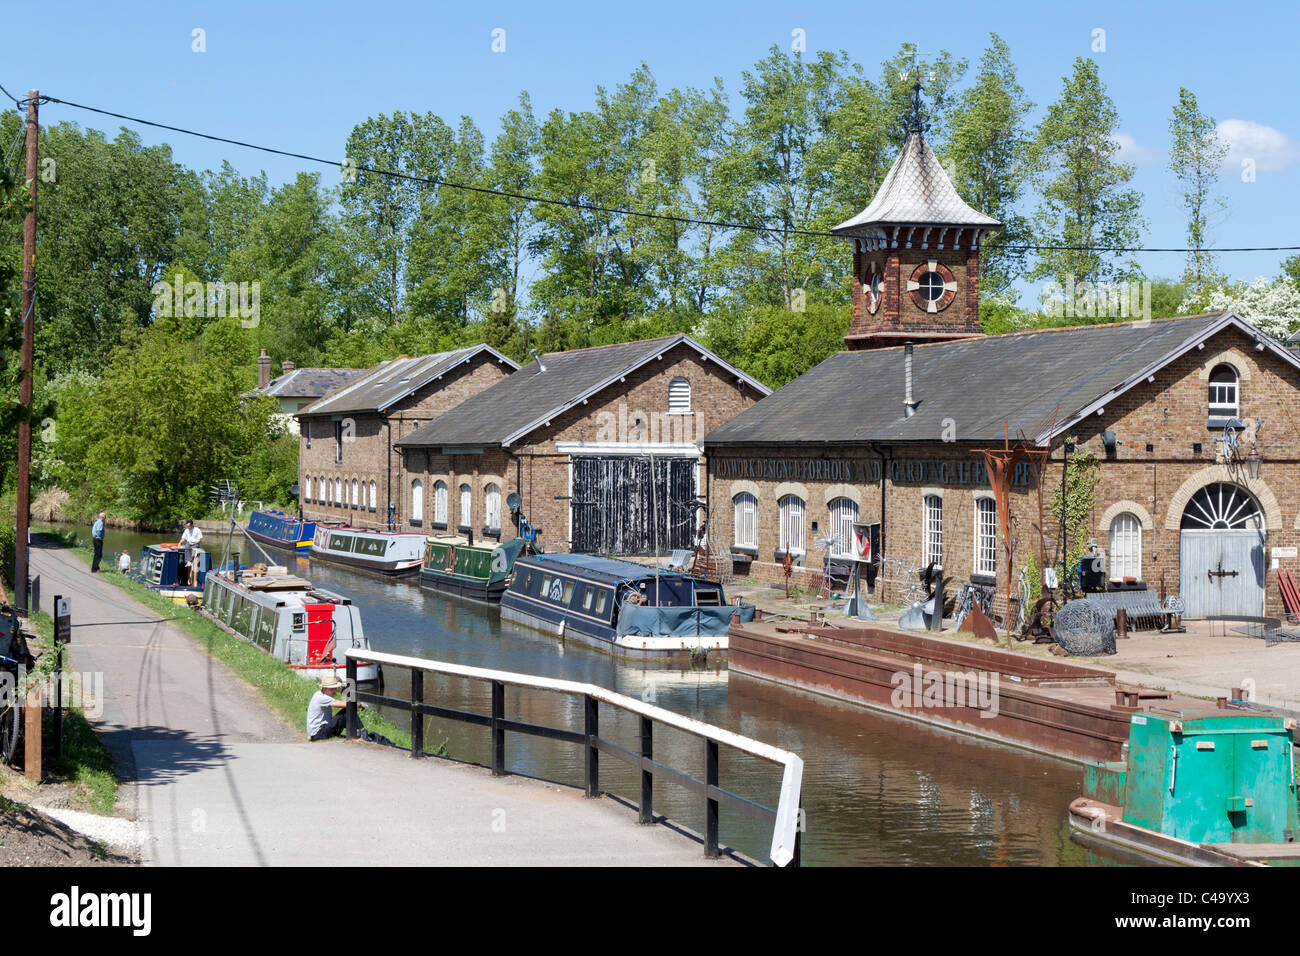 The Grand Union Canal at Bulbourne, near Tring, Herfordshire, UK Stock Photo